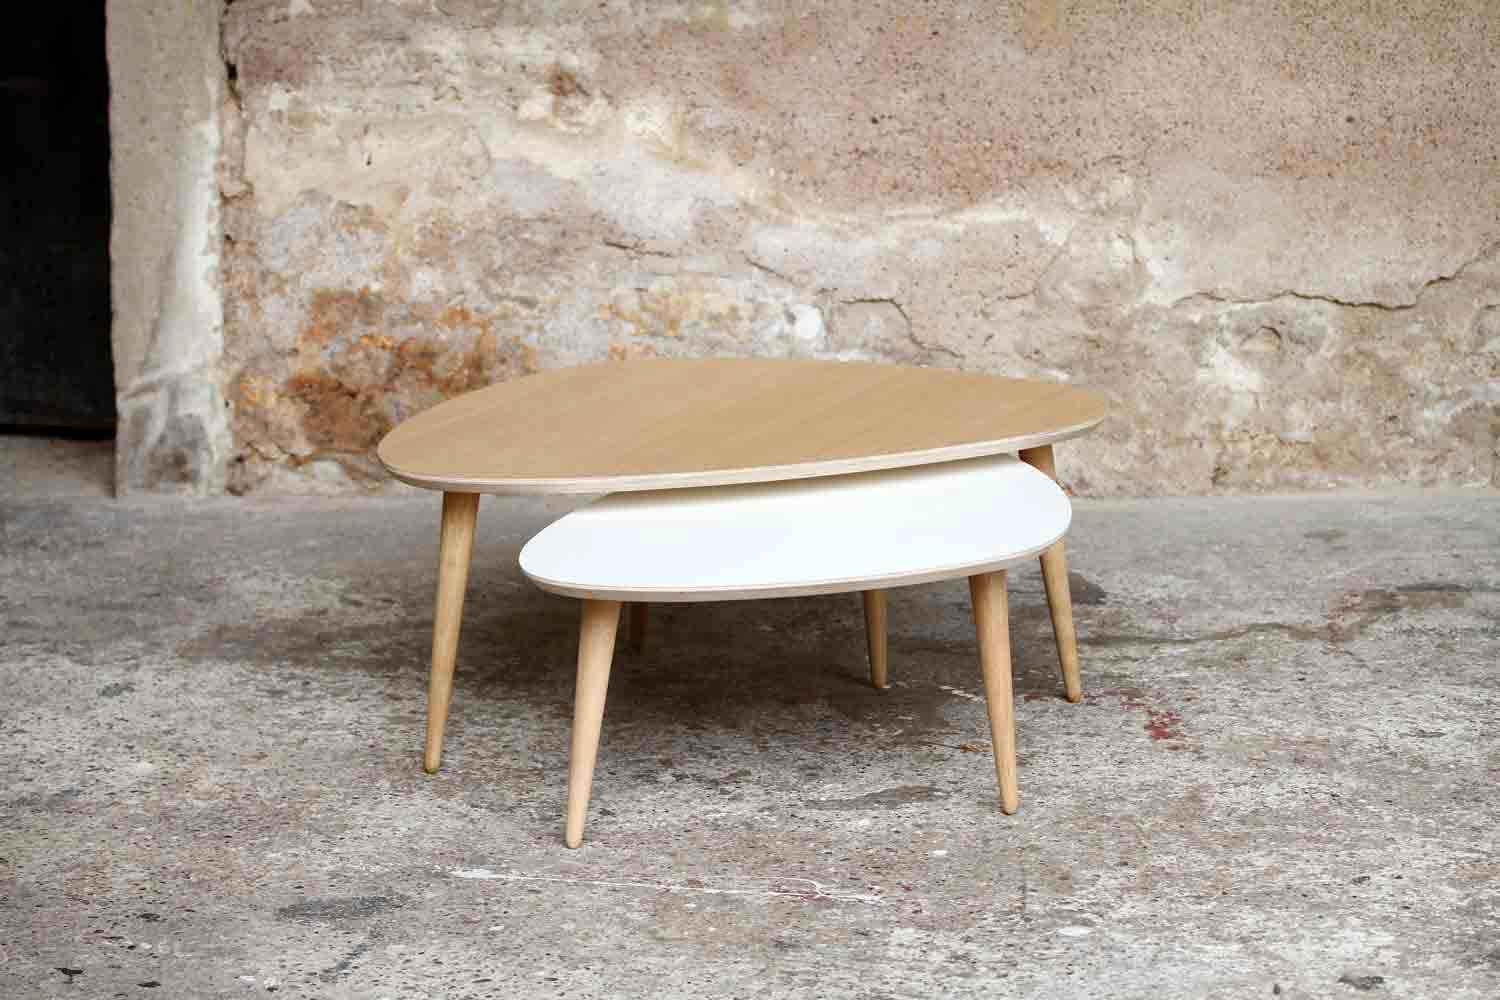 Table basse scandinave duo